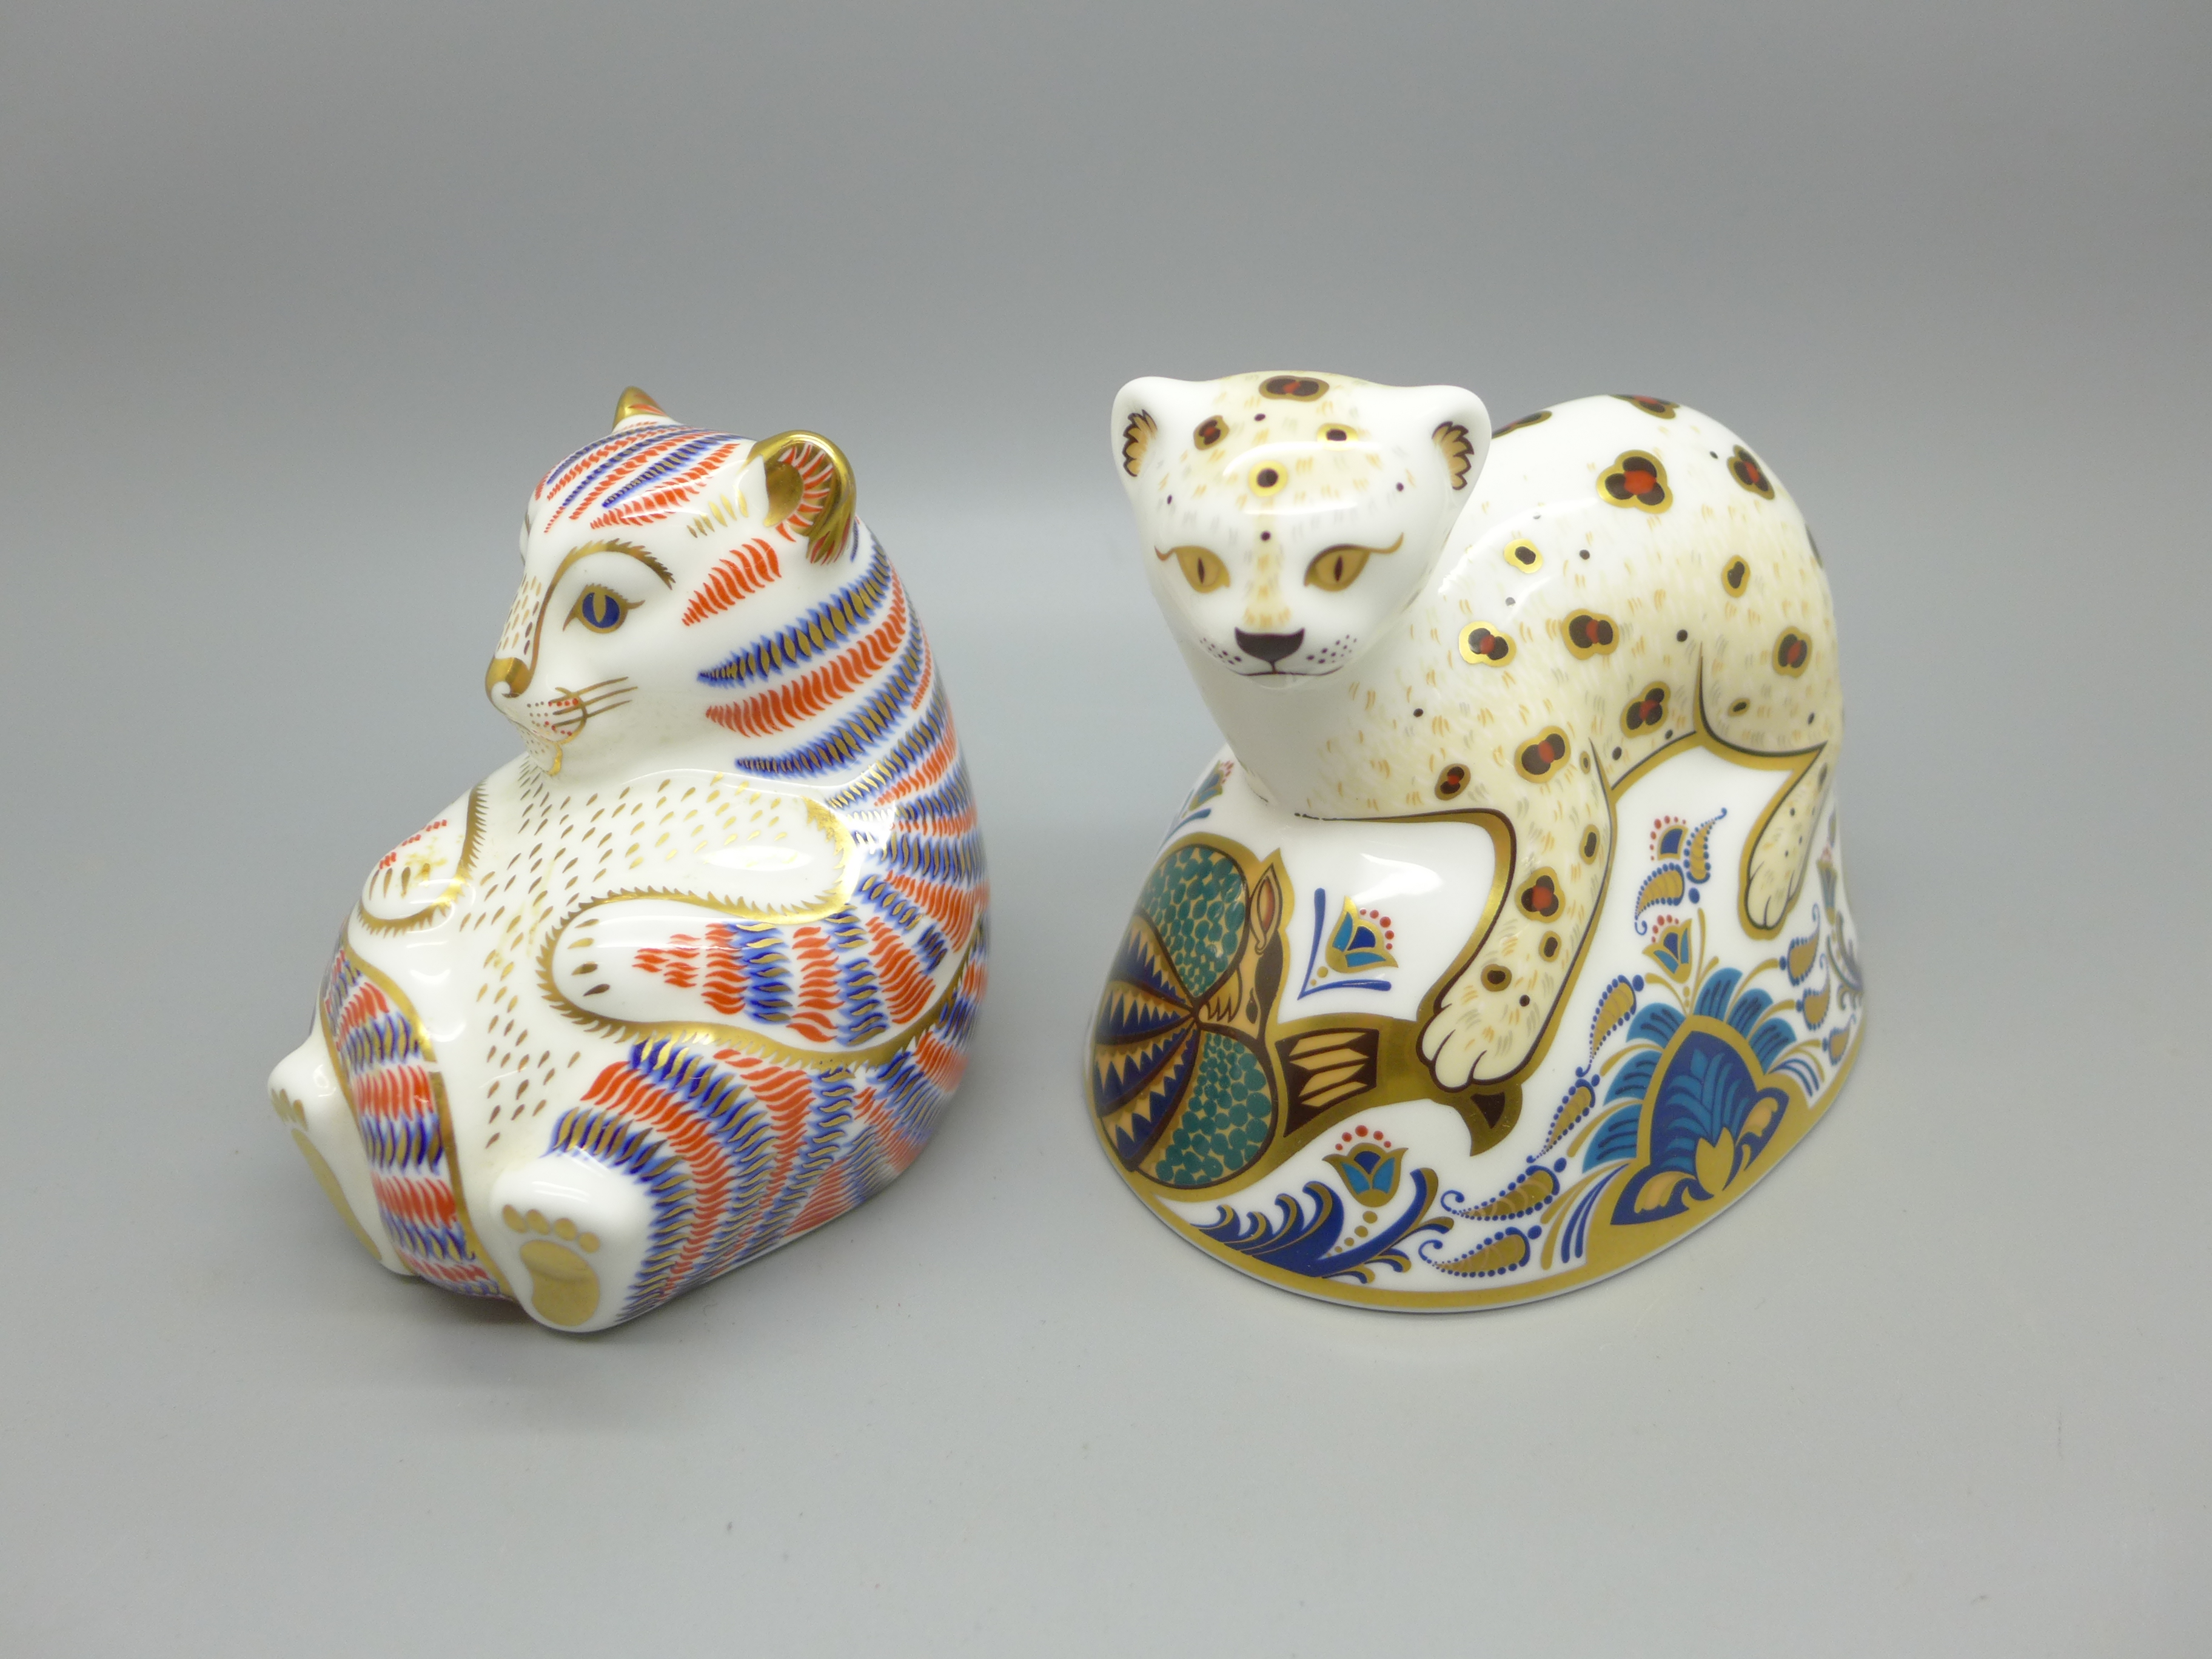 Two Royal Crown Derby paperweights - Leopard Cub, specially commissioned limited edition for